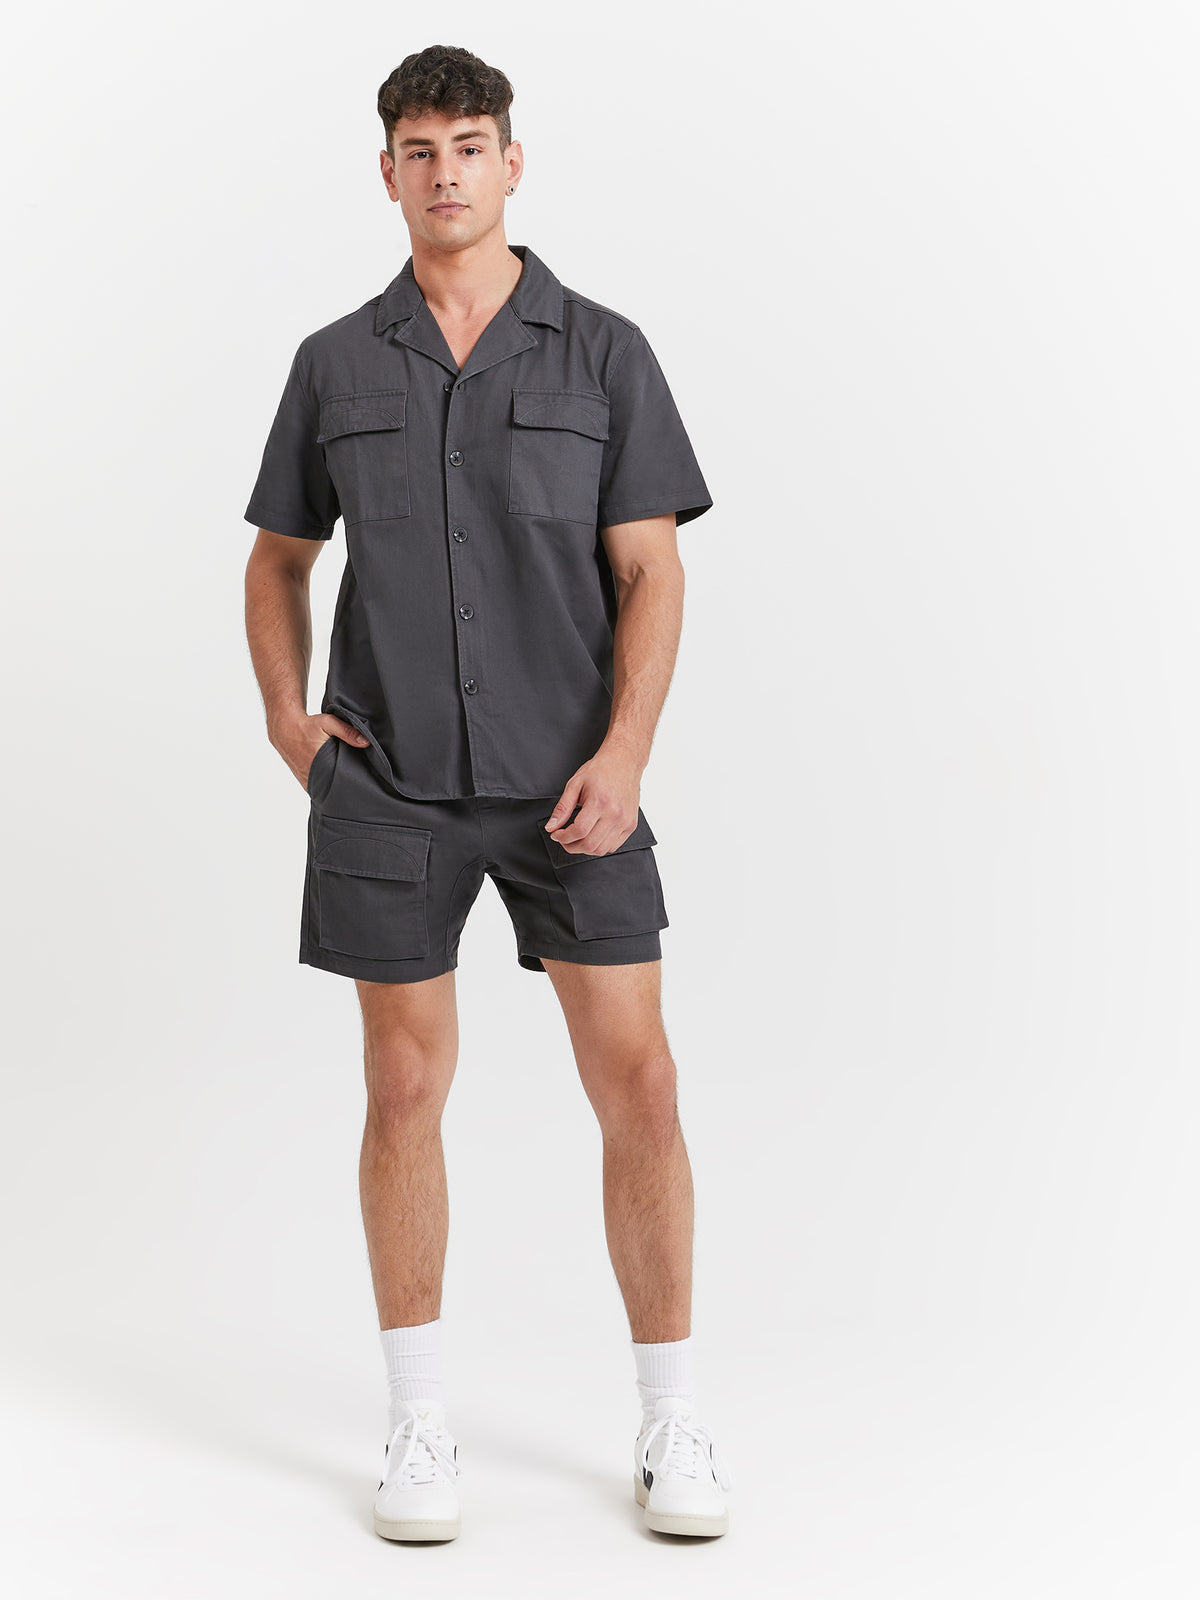 Pacific Short Sleeve Shirt in Slate